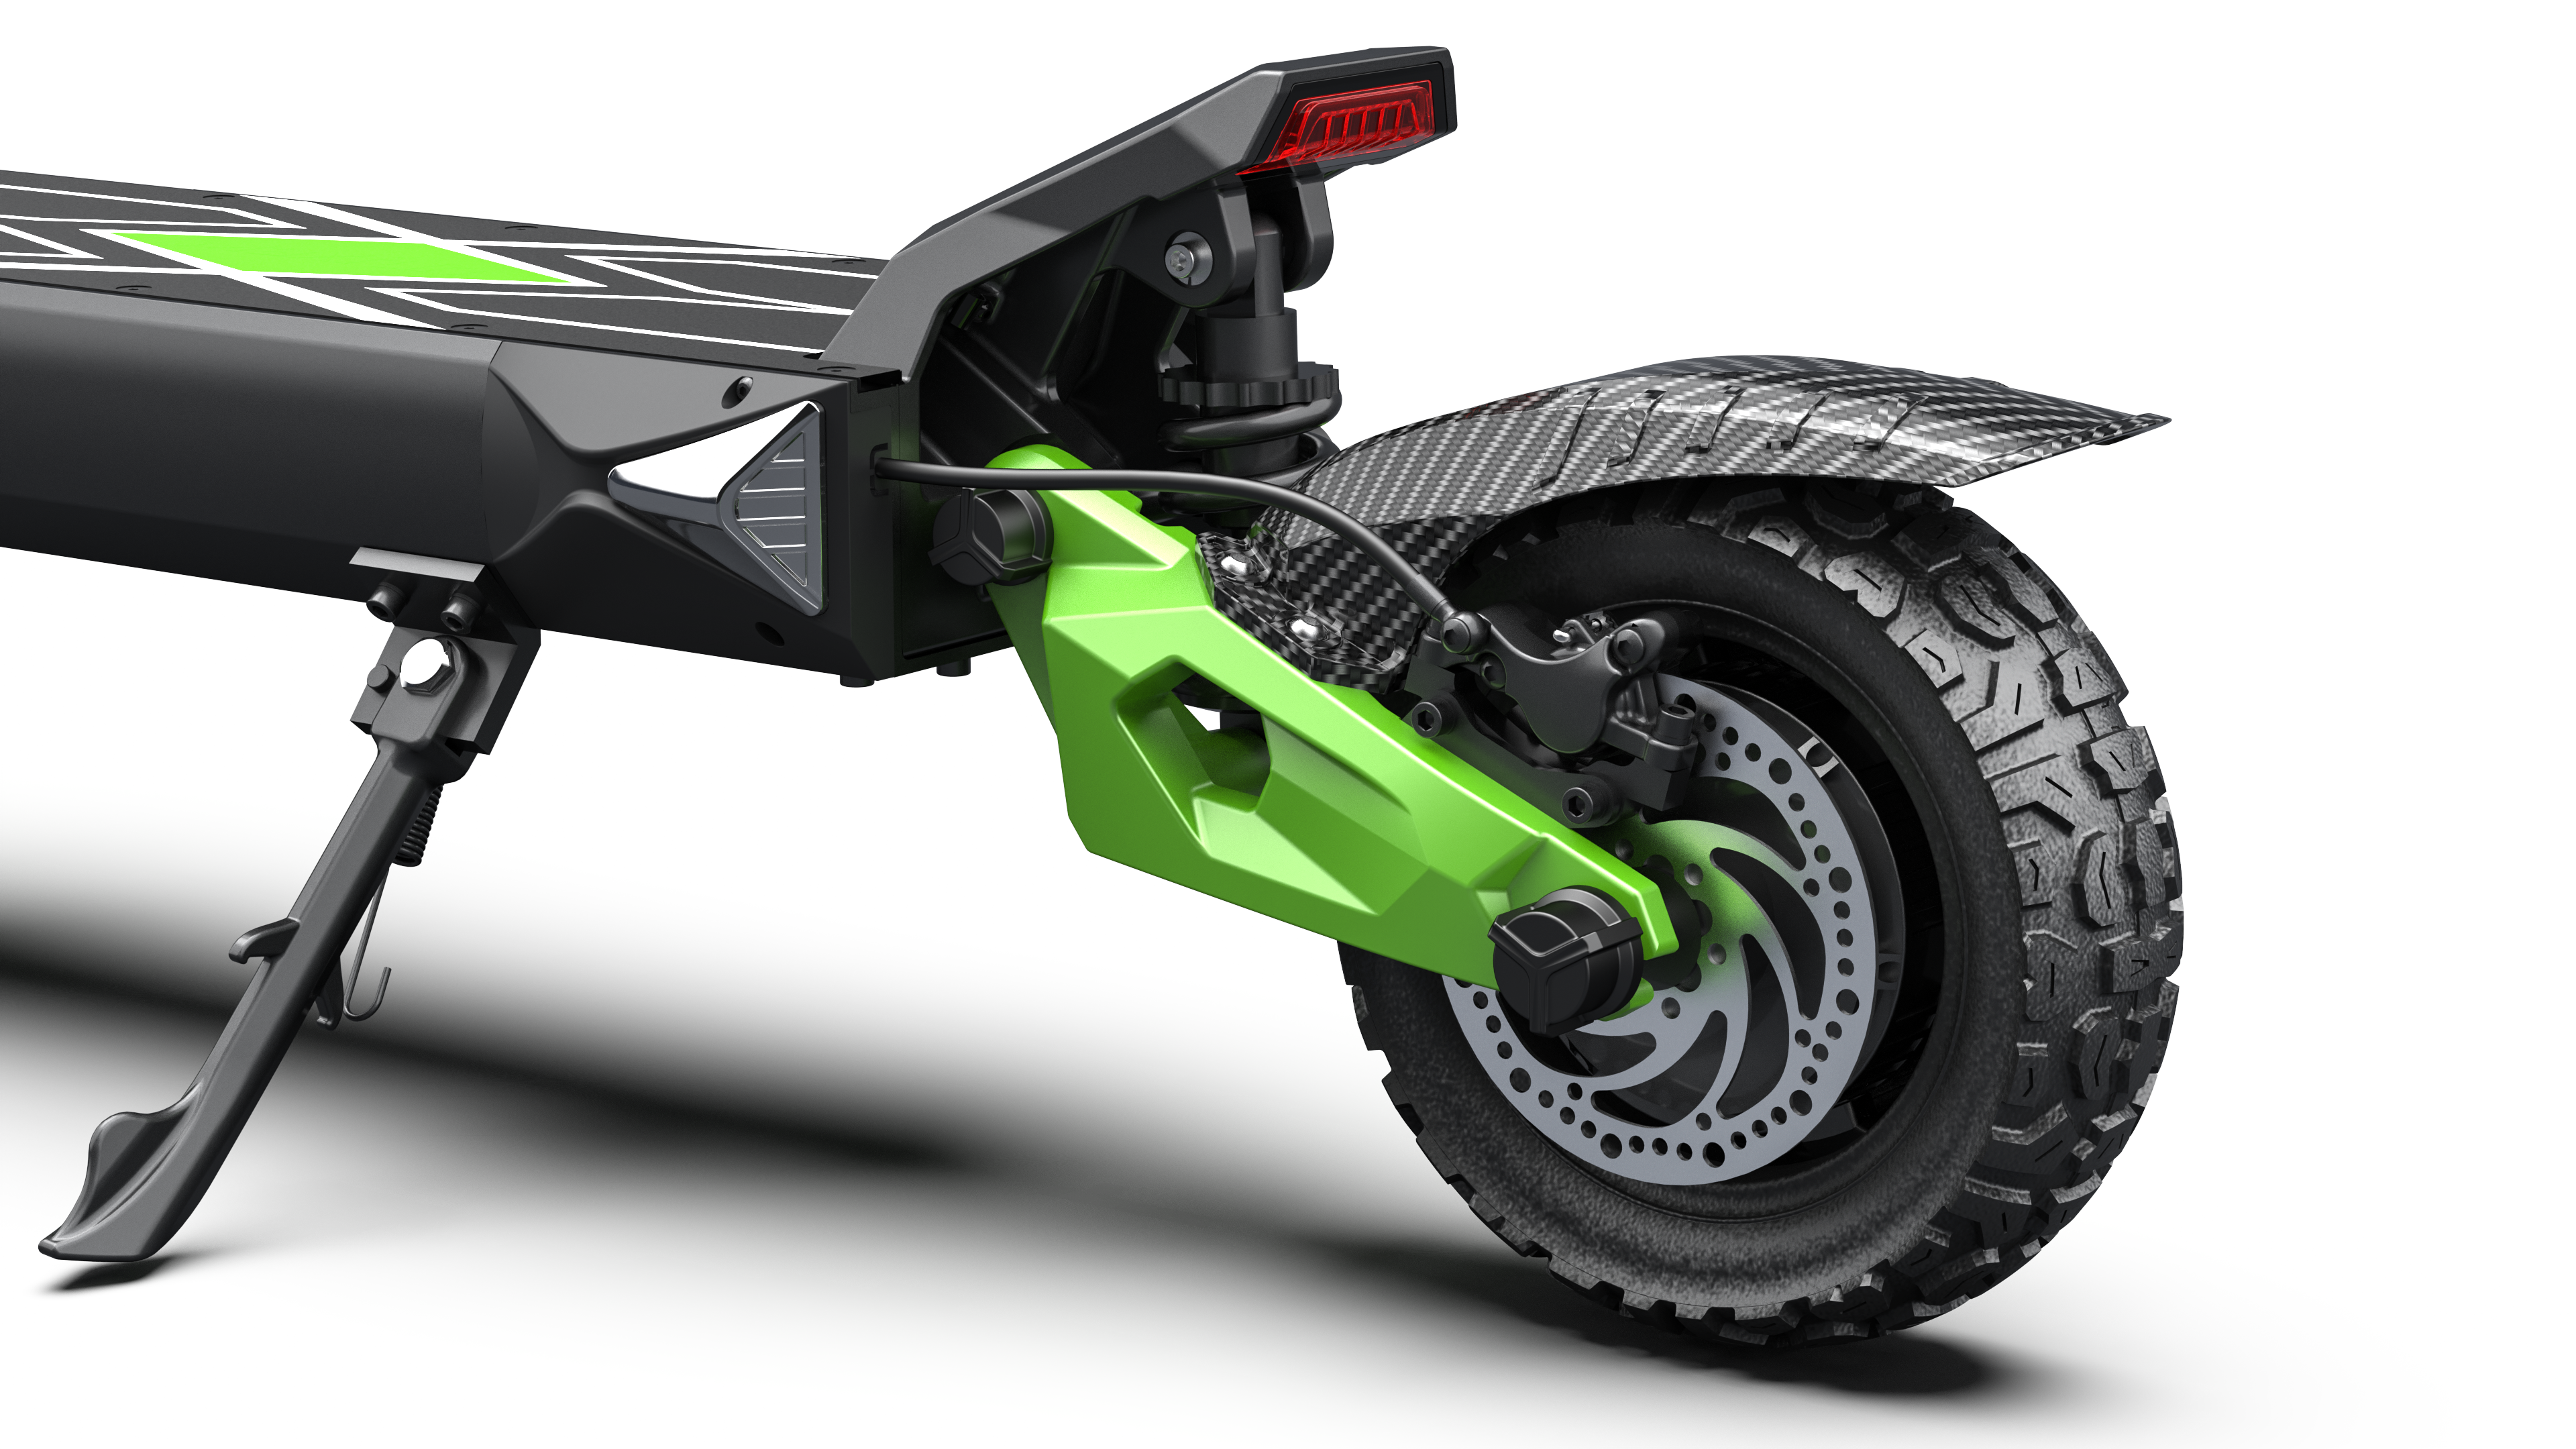 CYBERBOT R6 3000W Dual Motor Electric Scooter, Off- Road E-scooter, Soild Tire, Green&Black